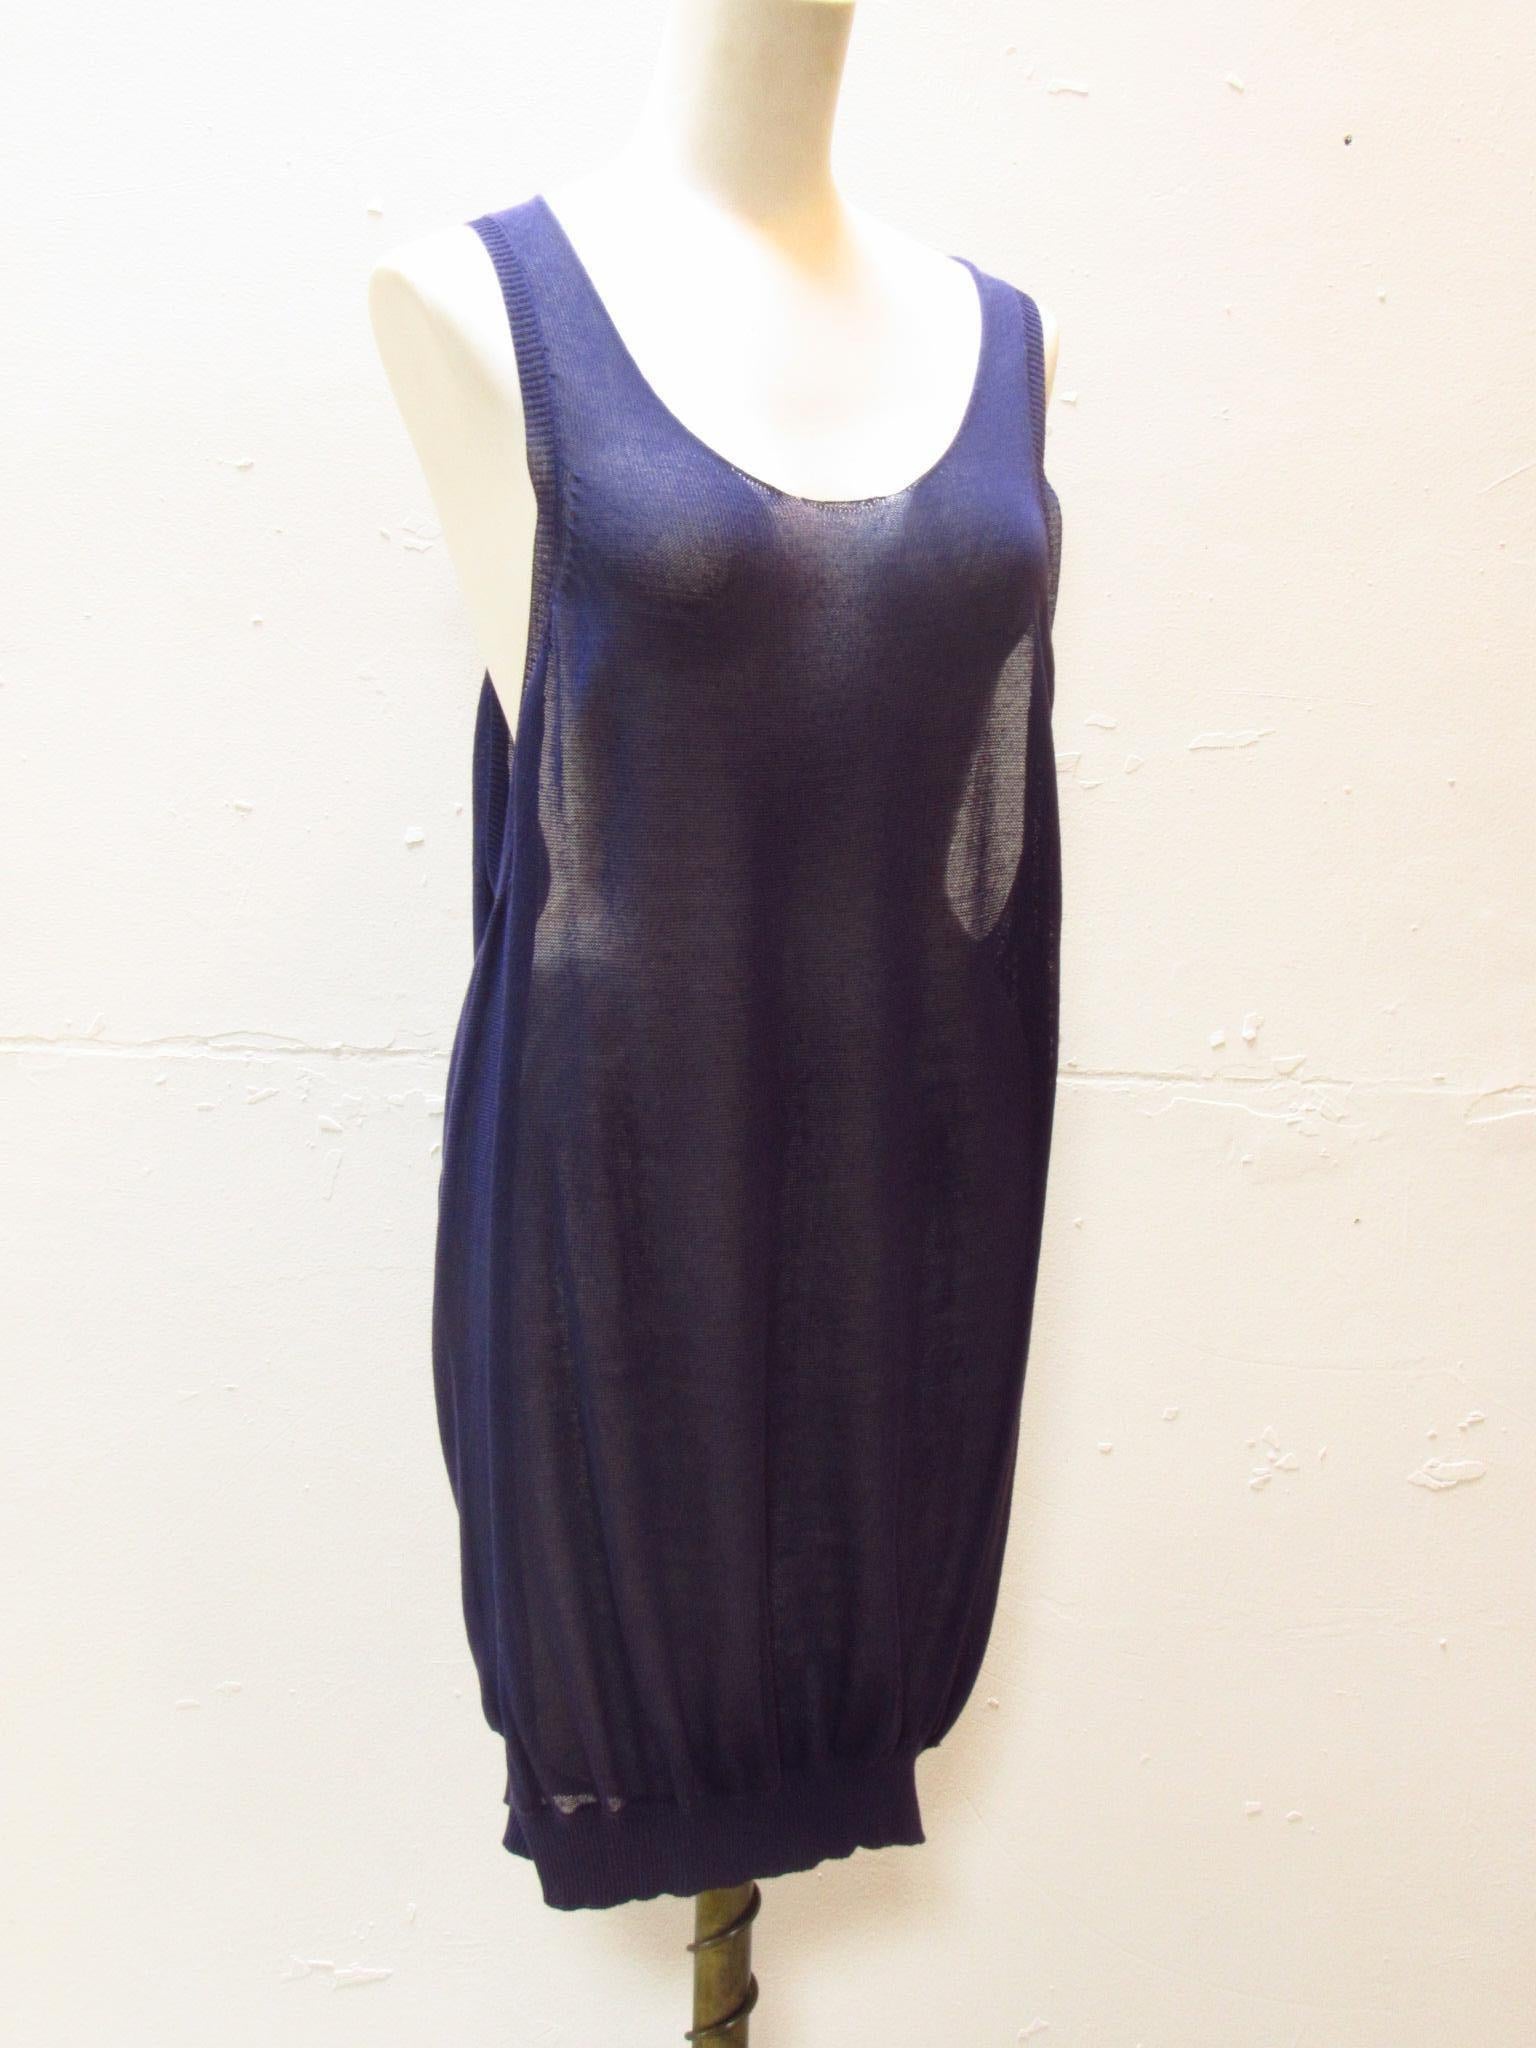 Steel blue woven cotton racerback tank top from Y'S by Yohji Yamamoto. This vintage tank is tunic length, making it a versatile piece.